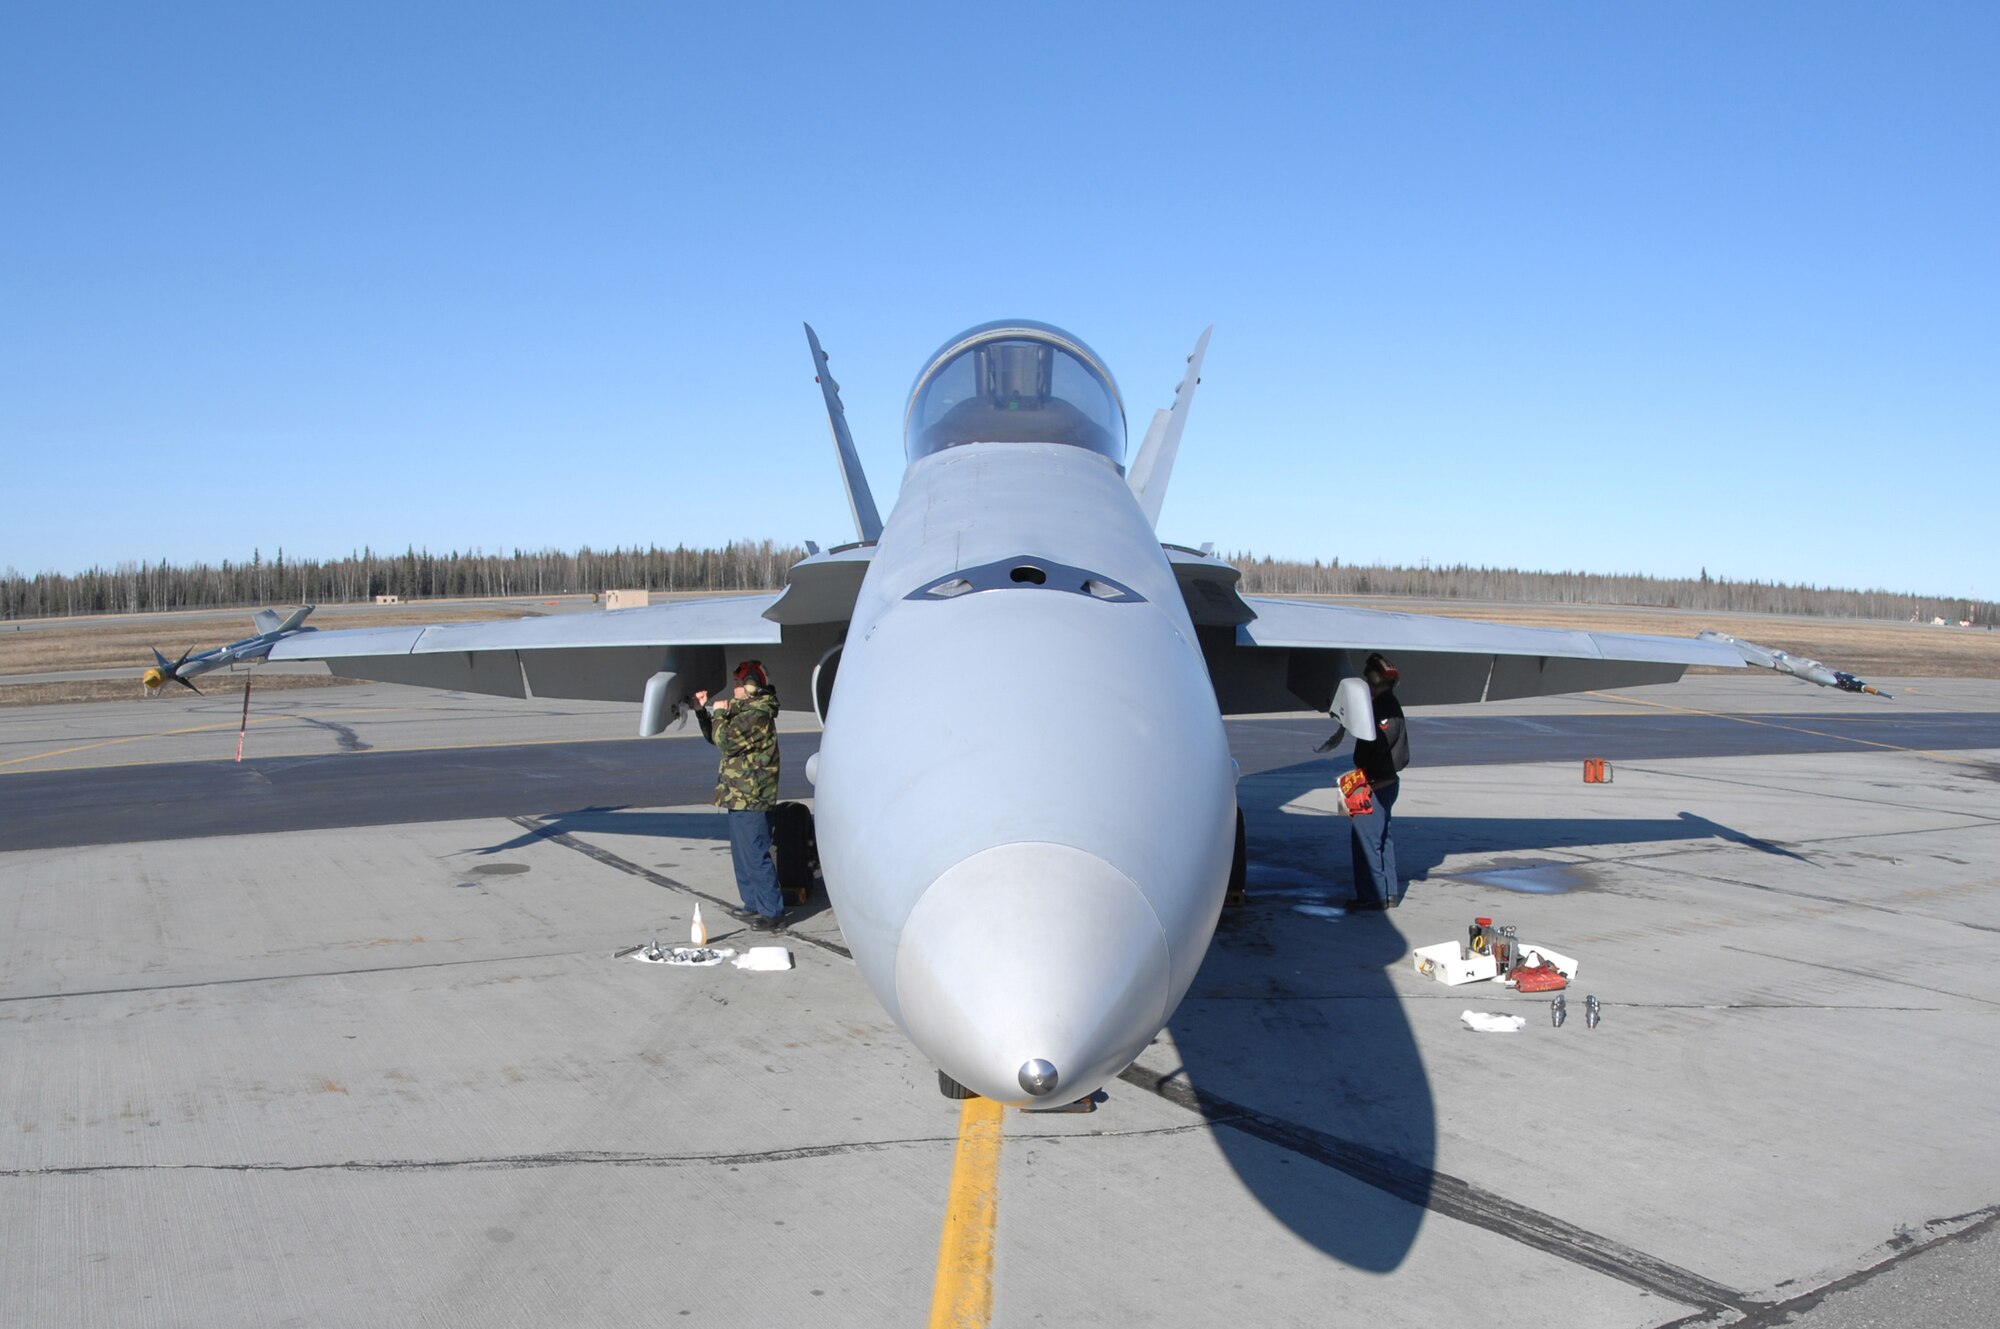 EIELSON AIR FORCE BASE, Alaska -- Two members of Strike Fighter Squadron Eight Seven (VFA-87) perform maintenance on a Navy F/A-18 during Red Flag-Alaska 07-1. VFA-87 is home based at Naval Air Station Oceana, Virginia. Red Flag-Alaska is a Pacific Air Forces-directed field training exercise for U.S. forces flown under simulated air combat conditions. It is conducted on the Pacific Alaskan Range Complex with air operations flown out of Eielson and Elmendorf Air Force Bases. (U.S. Air Force Photo by Staff Sgt Joshua Strang)